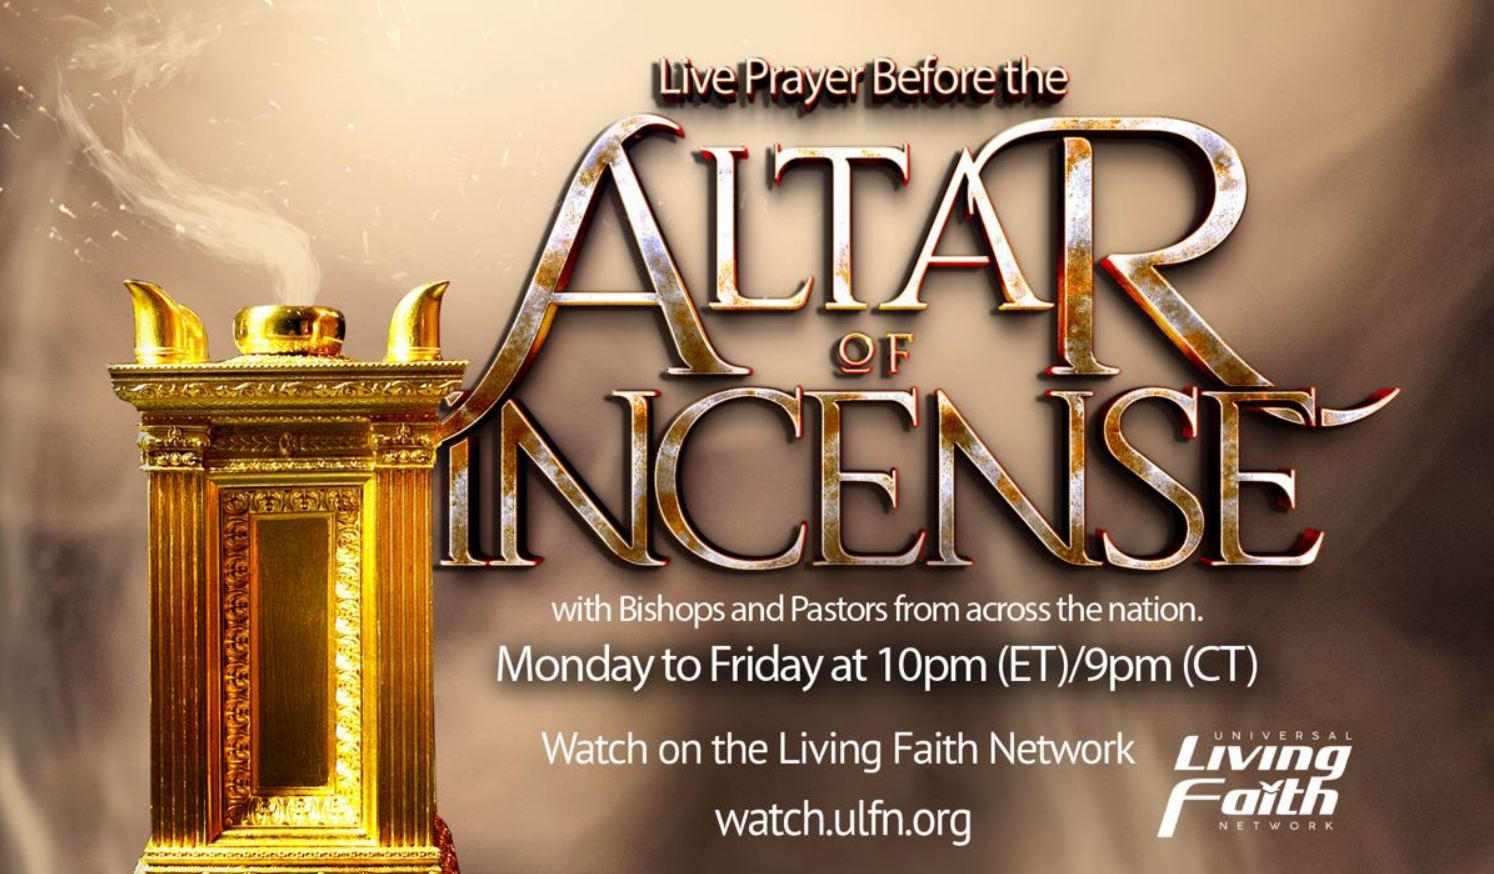 The Altar of Incense: The Wisdom That Comes From God